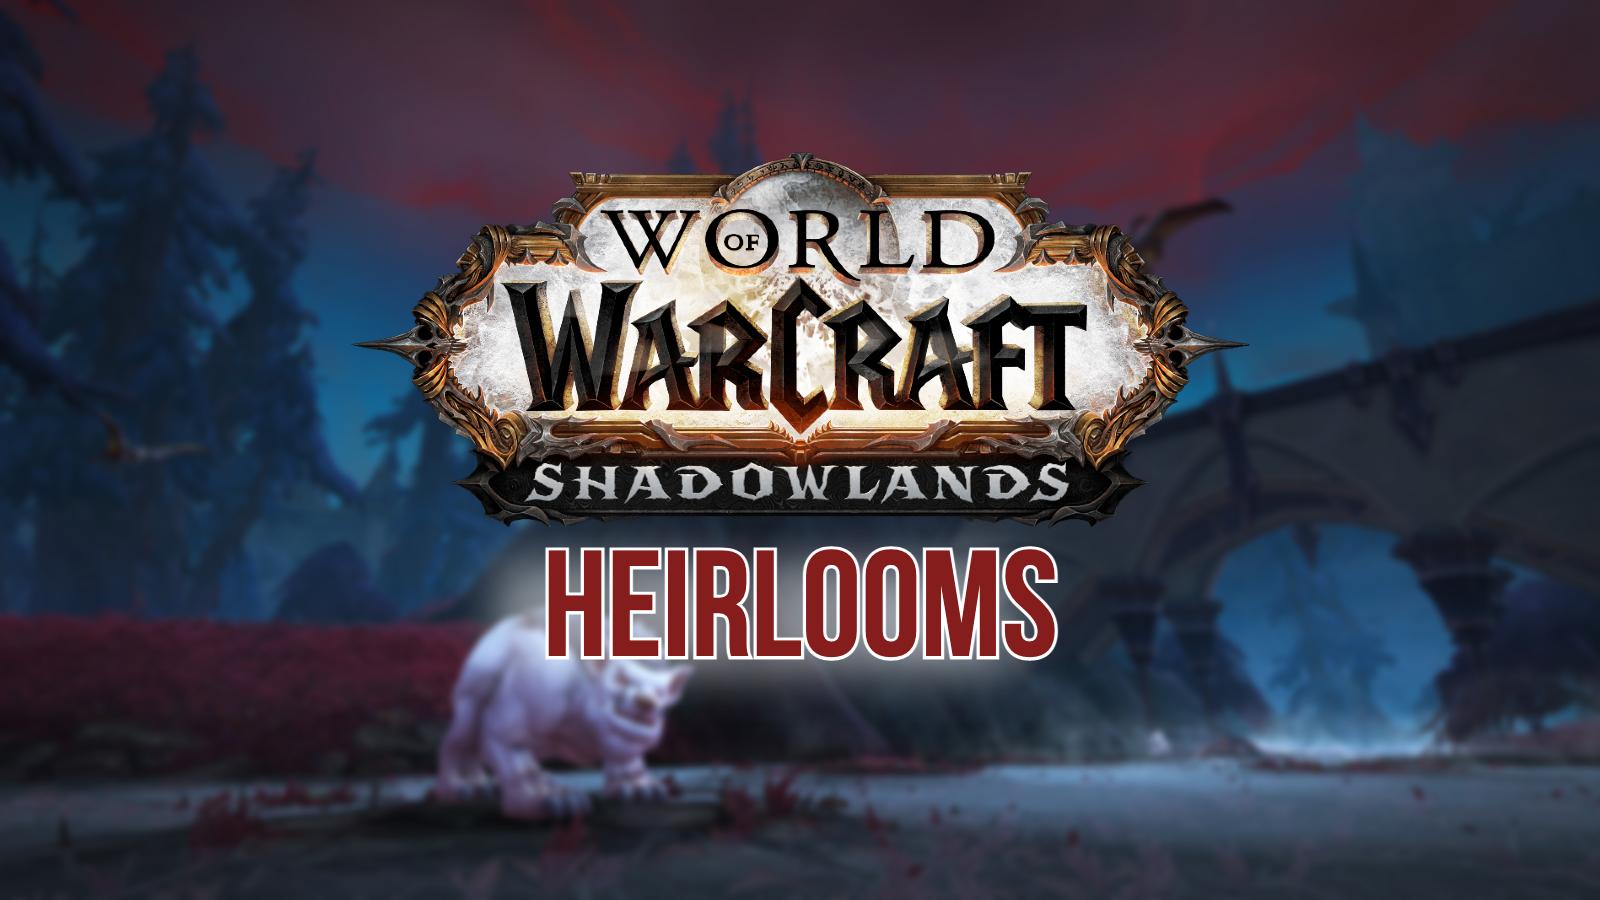 WoW Shadowlands Hierlooms